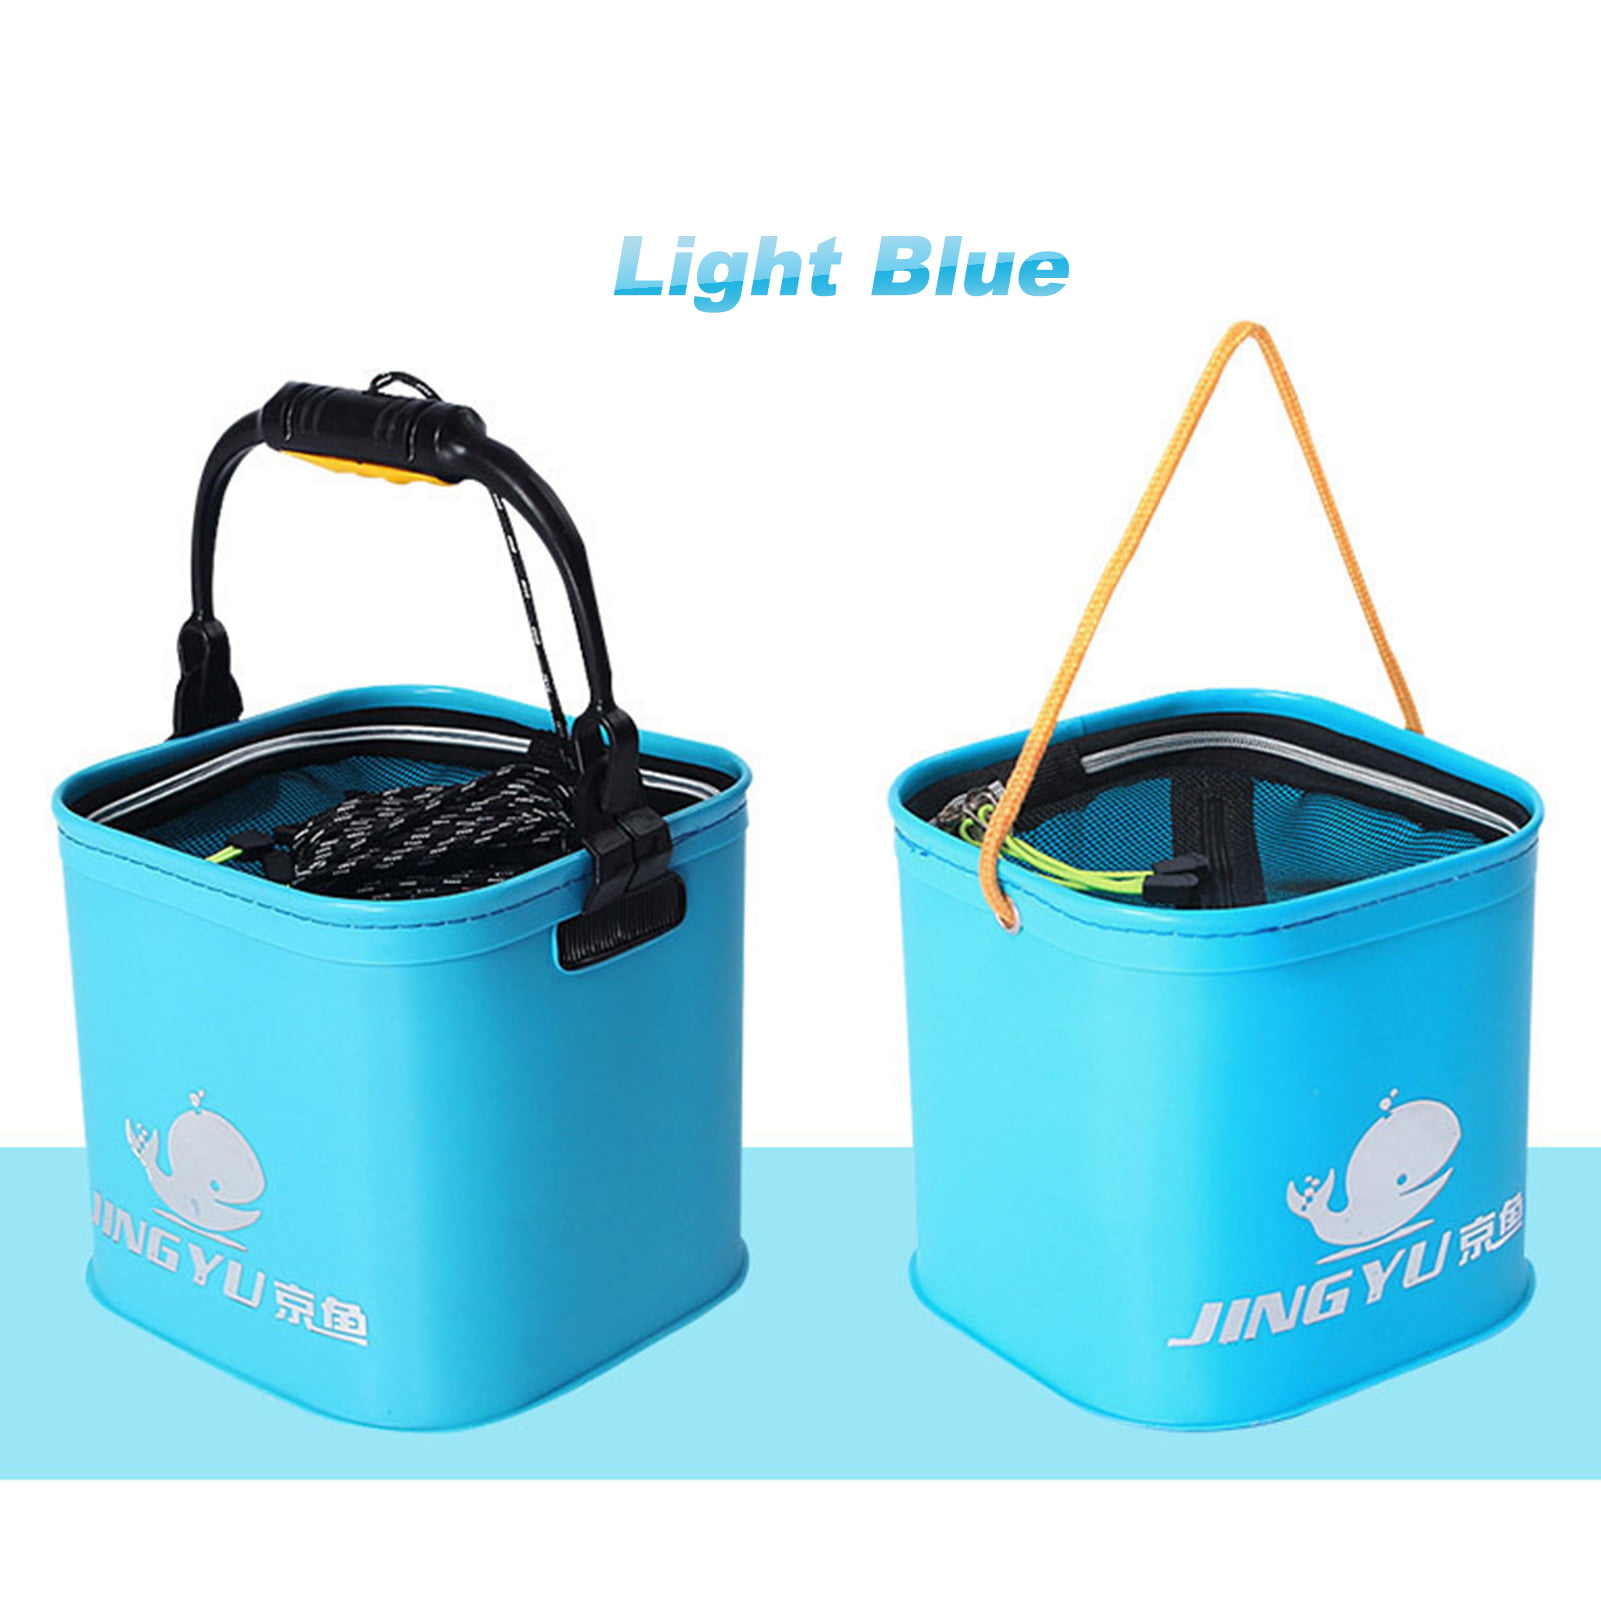 GMMGLT Portable 10/20l Outdoor Fishing Bucket Fish Bag - 1pc Fishing Waterproof Buckets, 3 Colors in Available, Carp Fishing Accessories Tackle, Size: 35